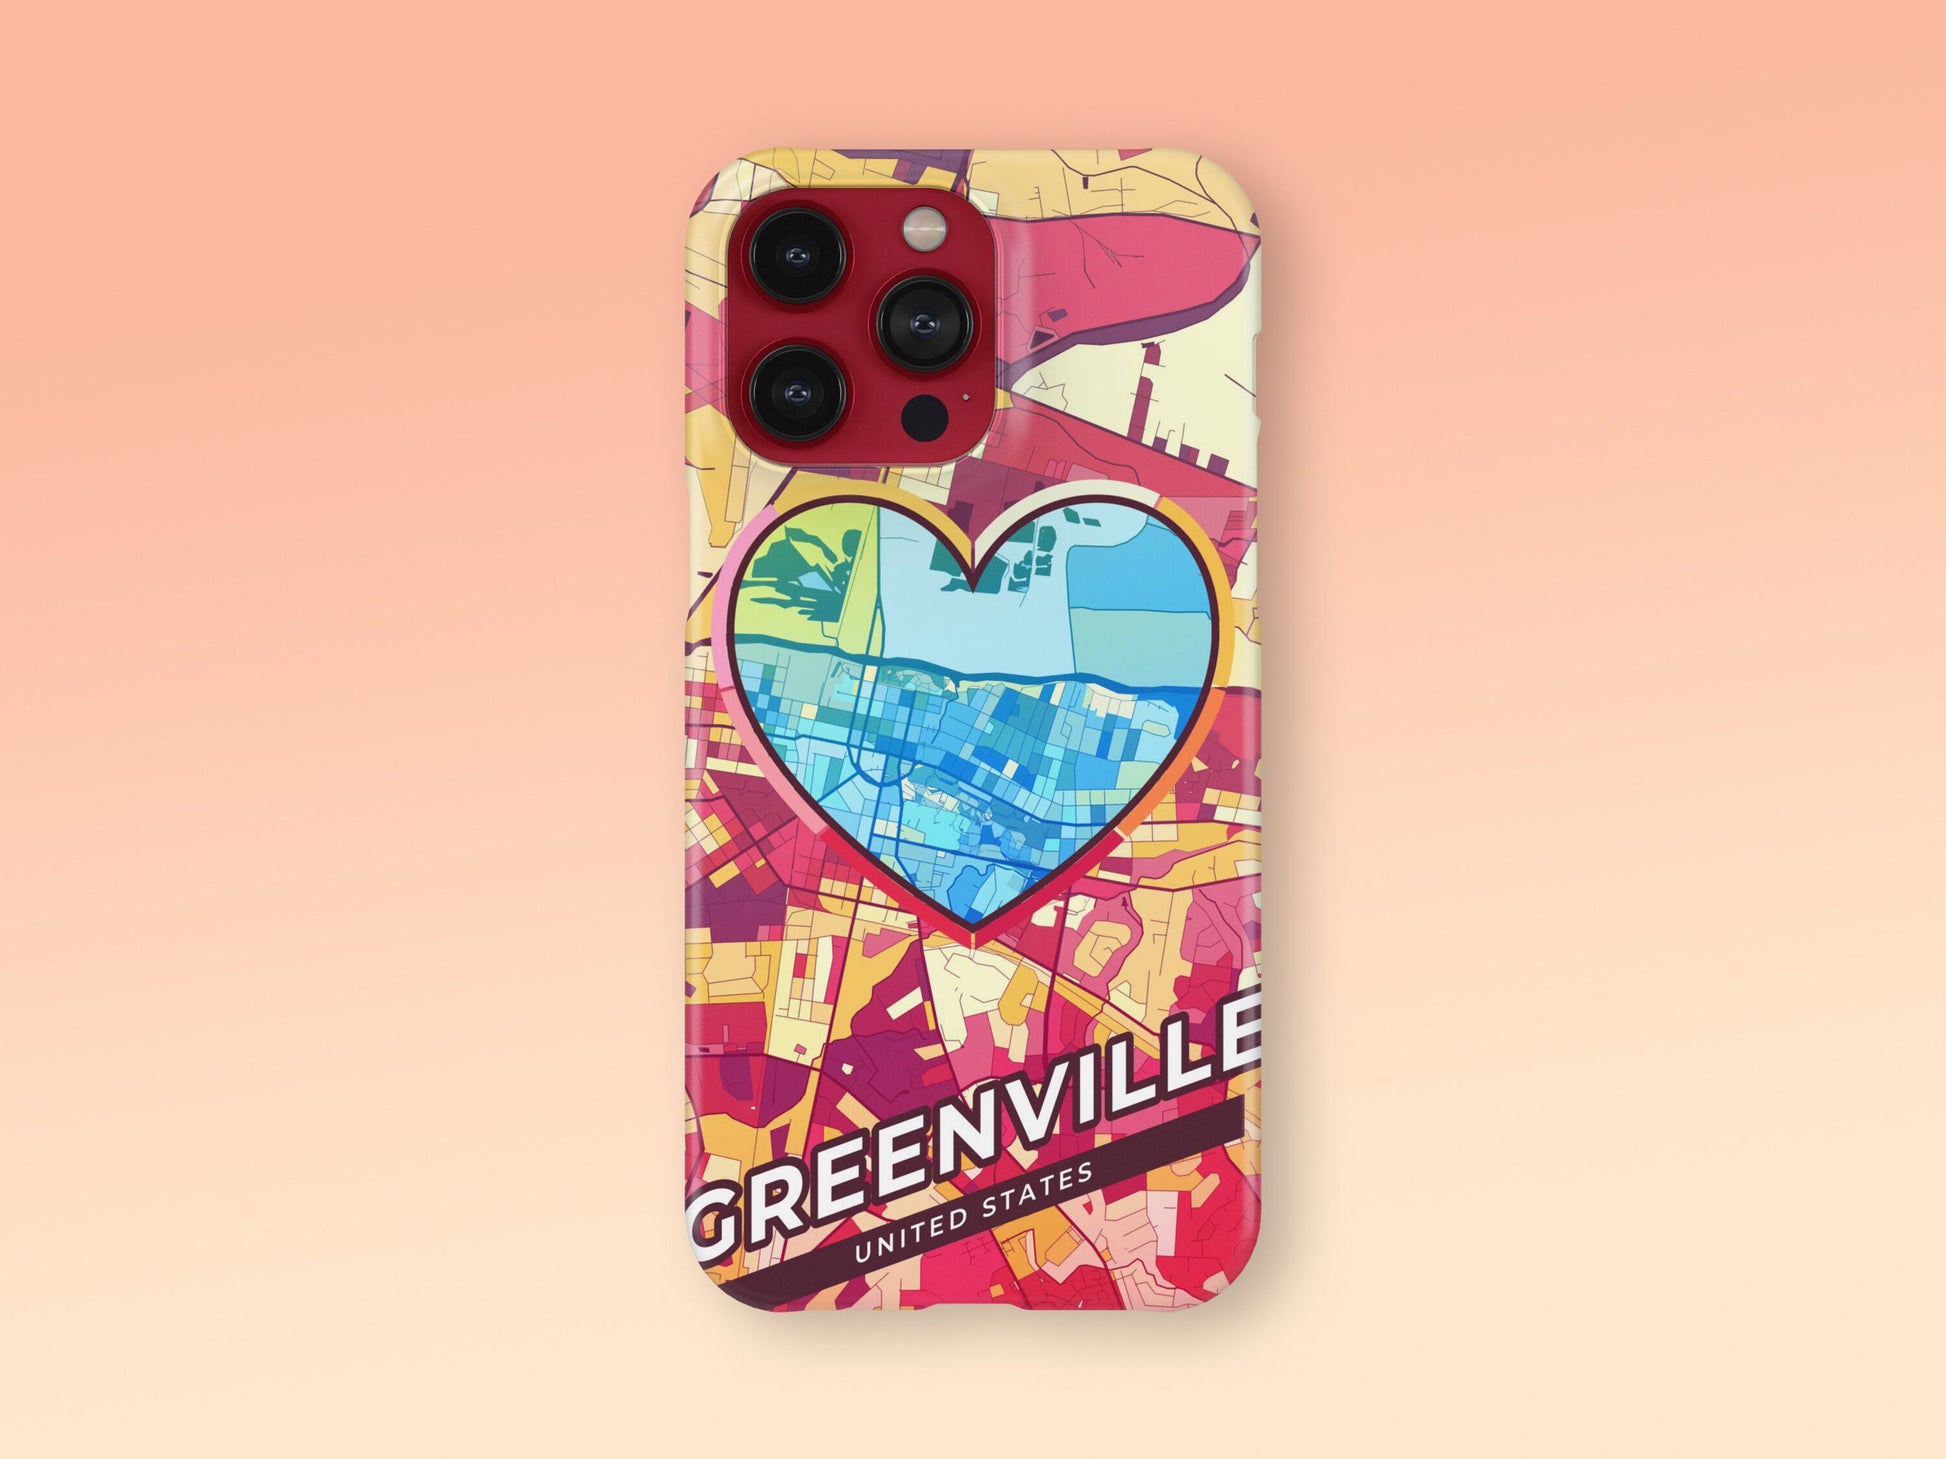 Greenville North Carolina slim phone case with colorful icon. Birthday, wedding or housewarming gift. Couple match cases. 2